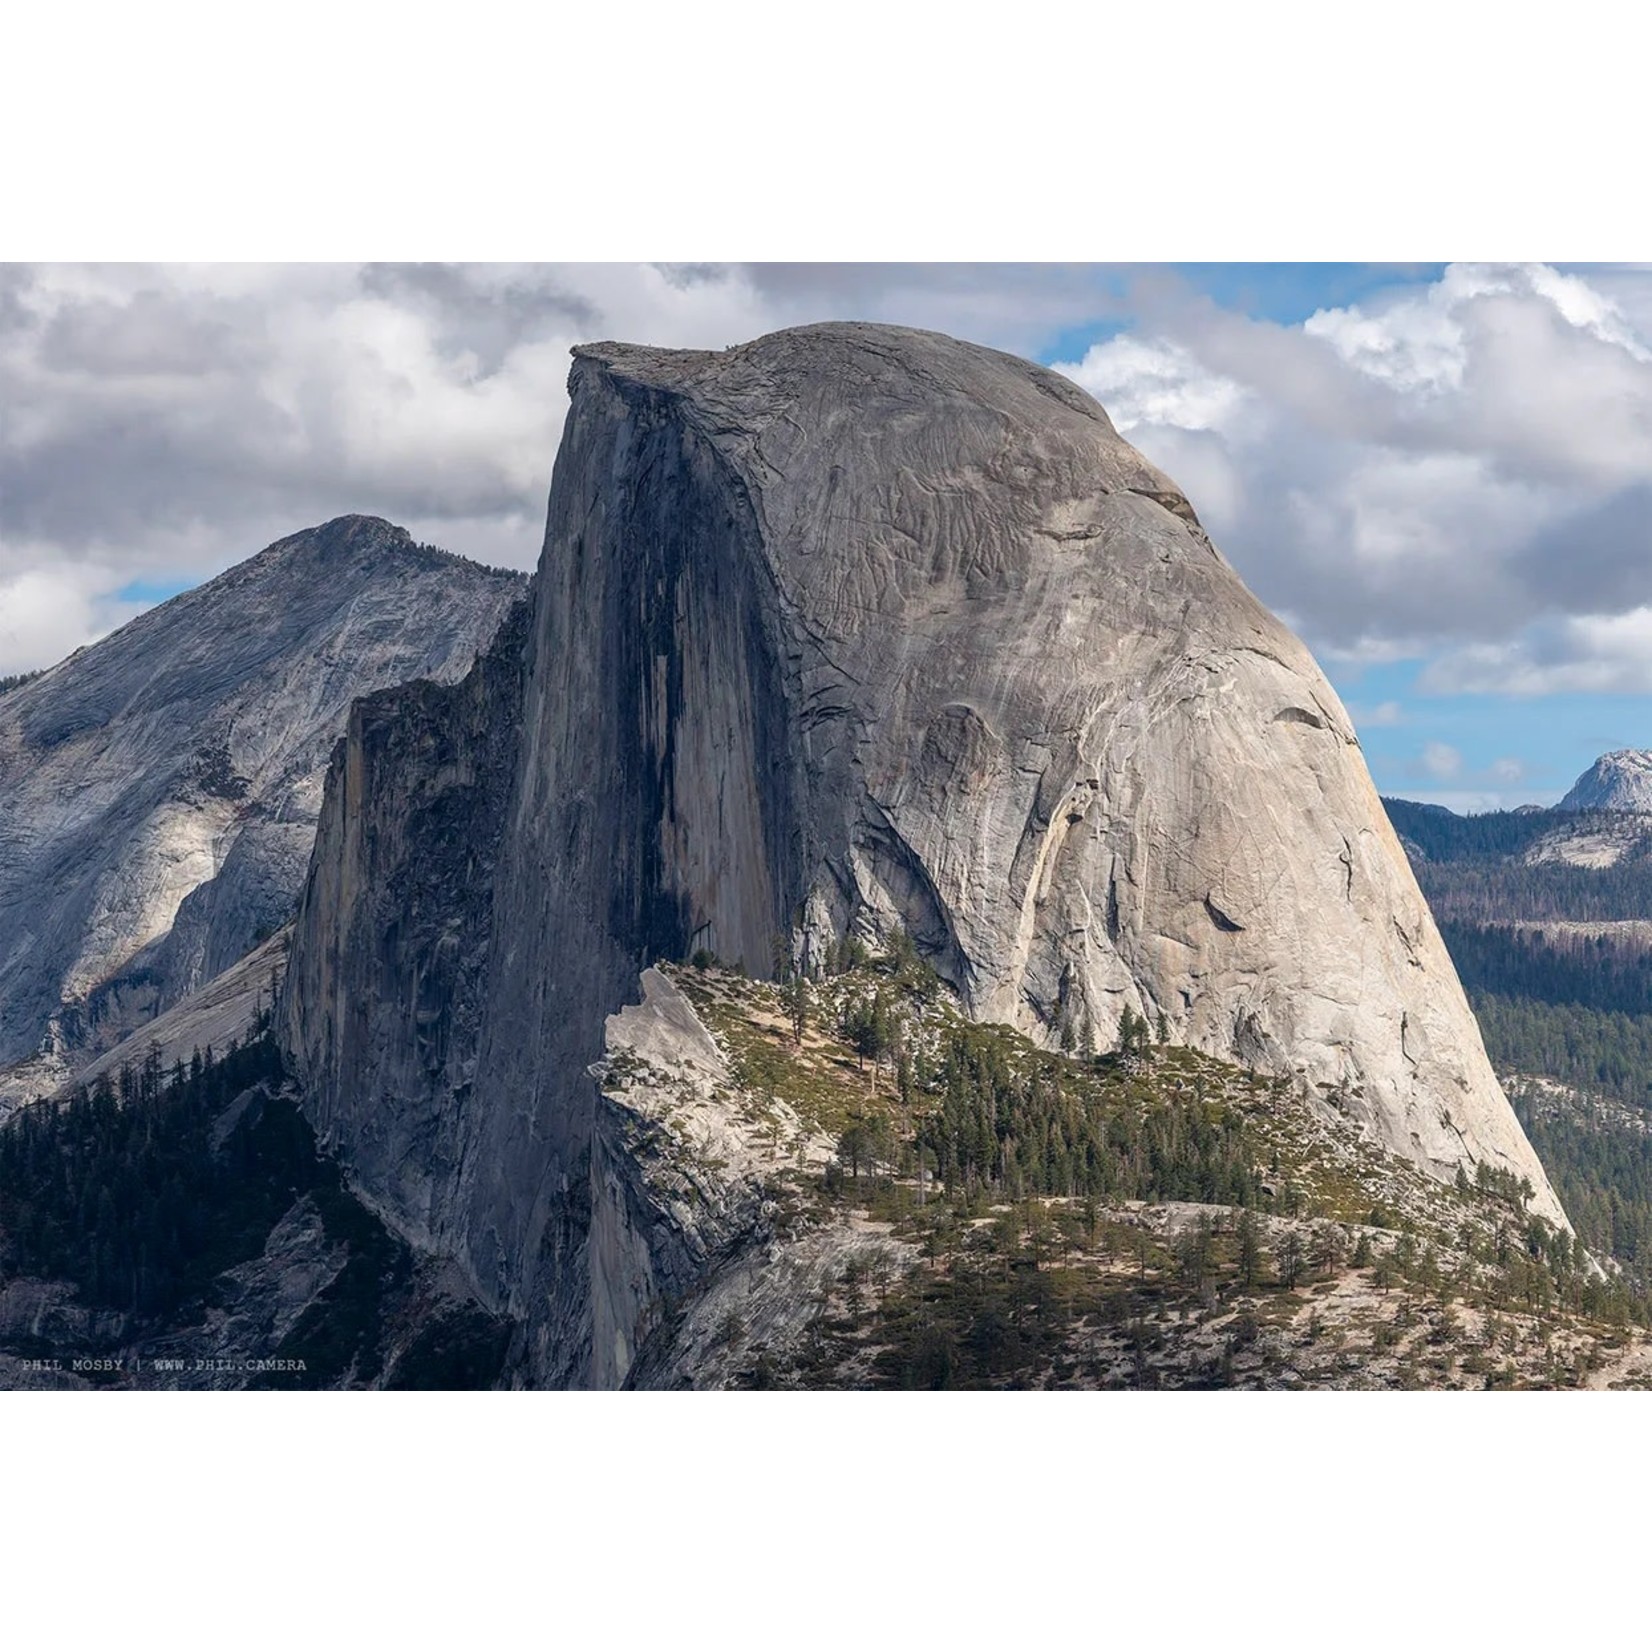 Phil Mosby Photography Postcard - "Perfect Light on Yosemite's Half Dome"